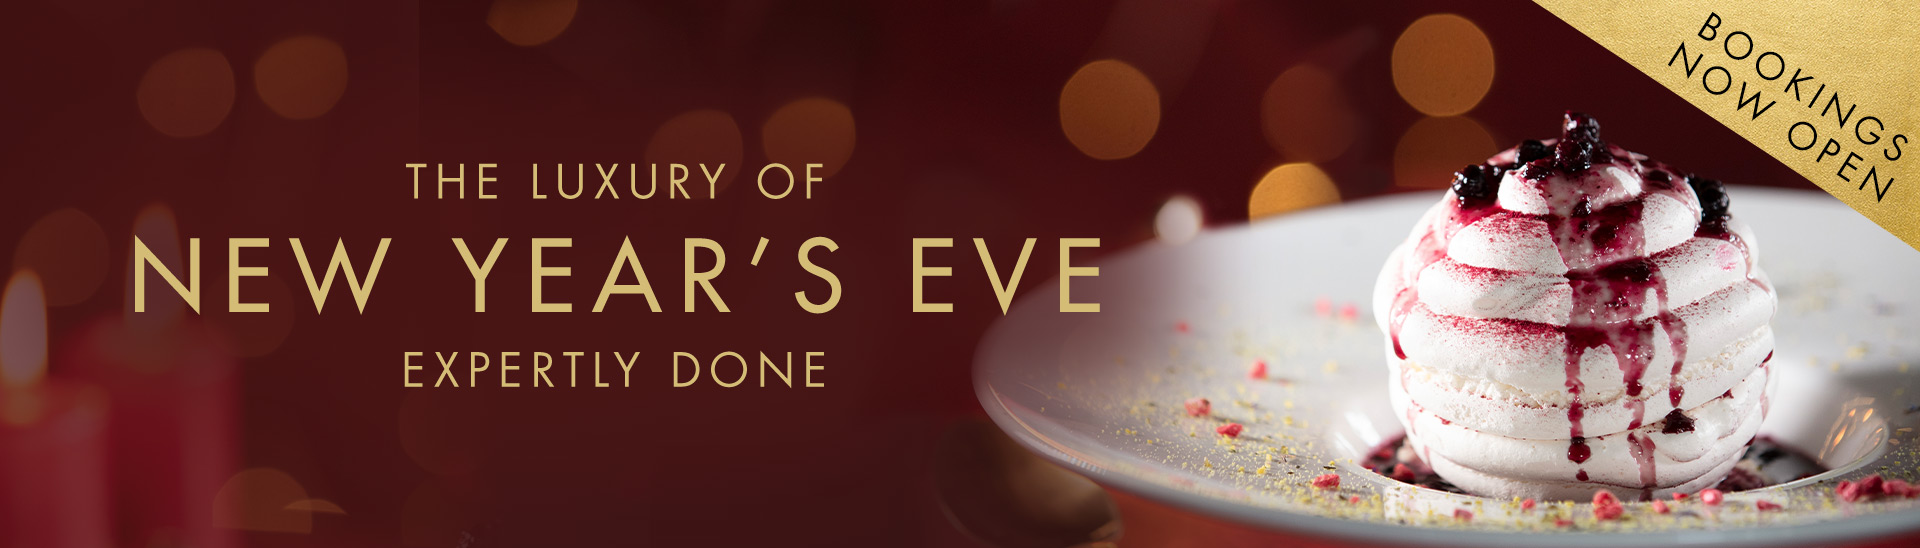 New Year’s Eve Menu at Miller & Carter Maidstone • Book Now